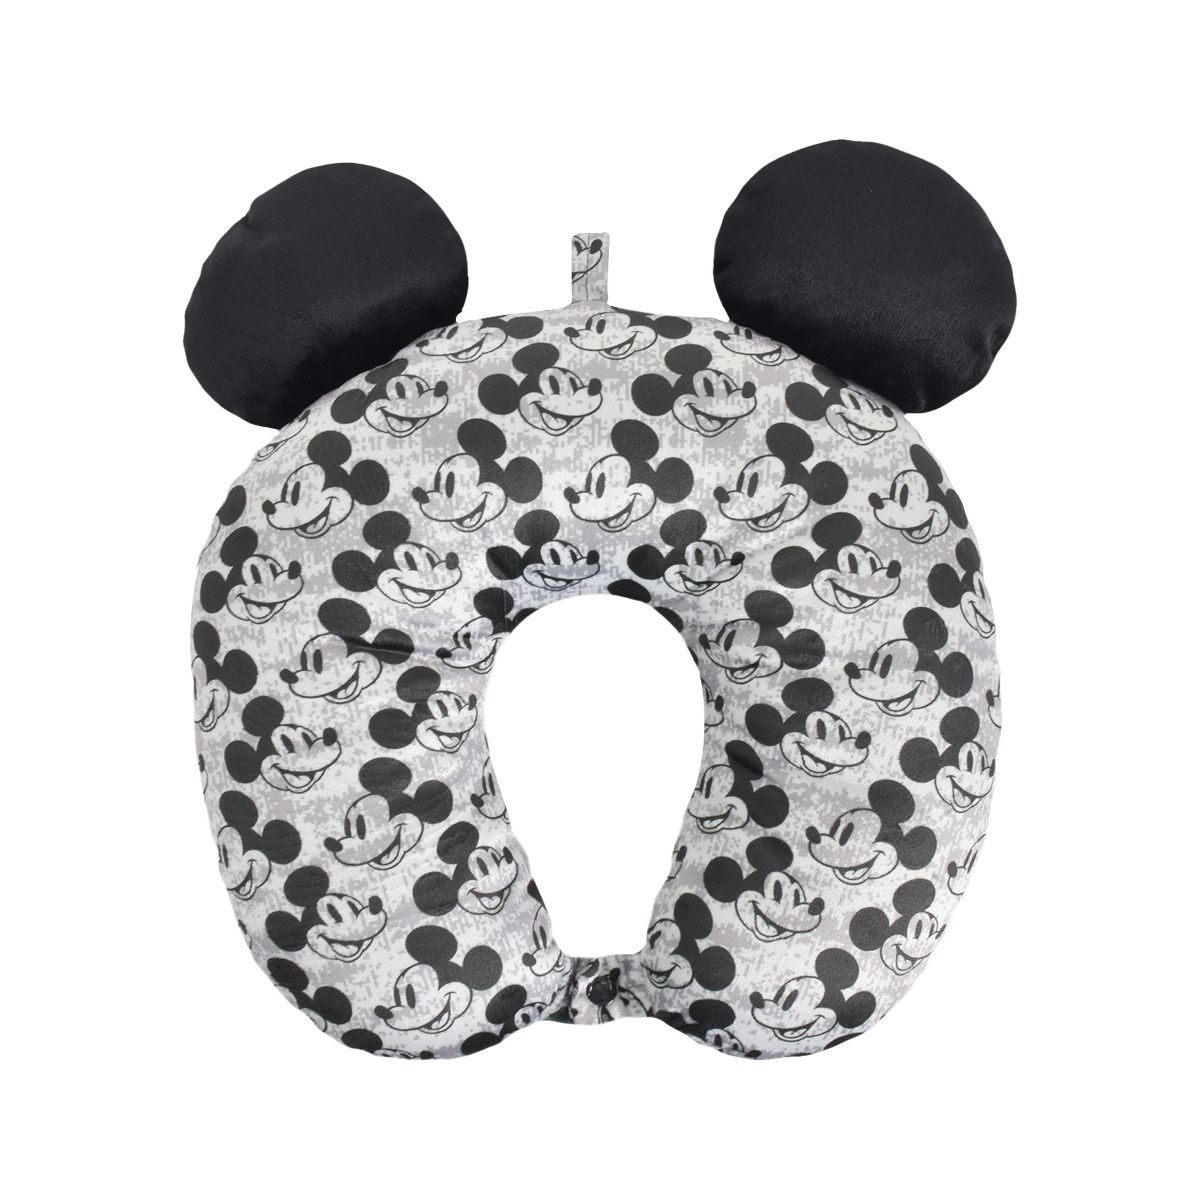 Disney Mickey Mouse Travel Neck Pillow with 3D Ears Grey | Target